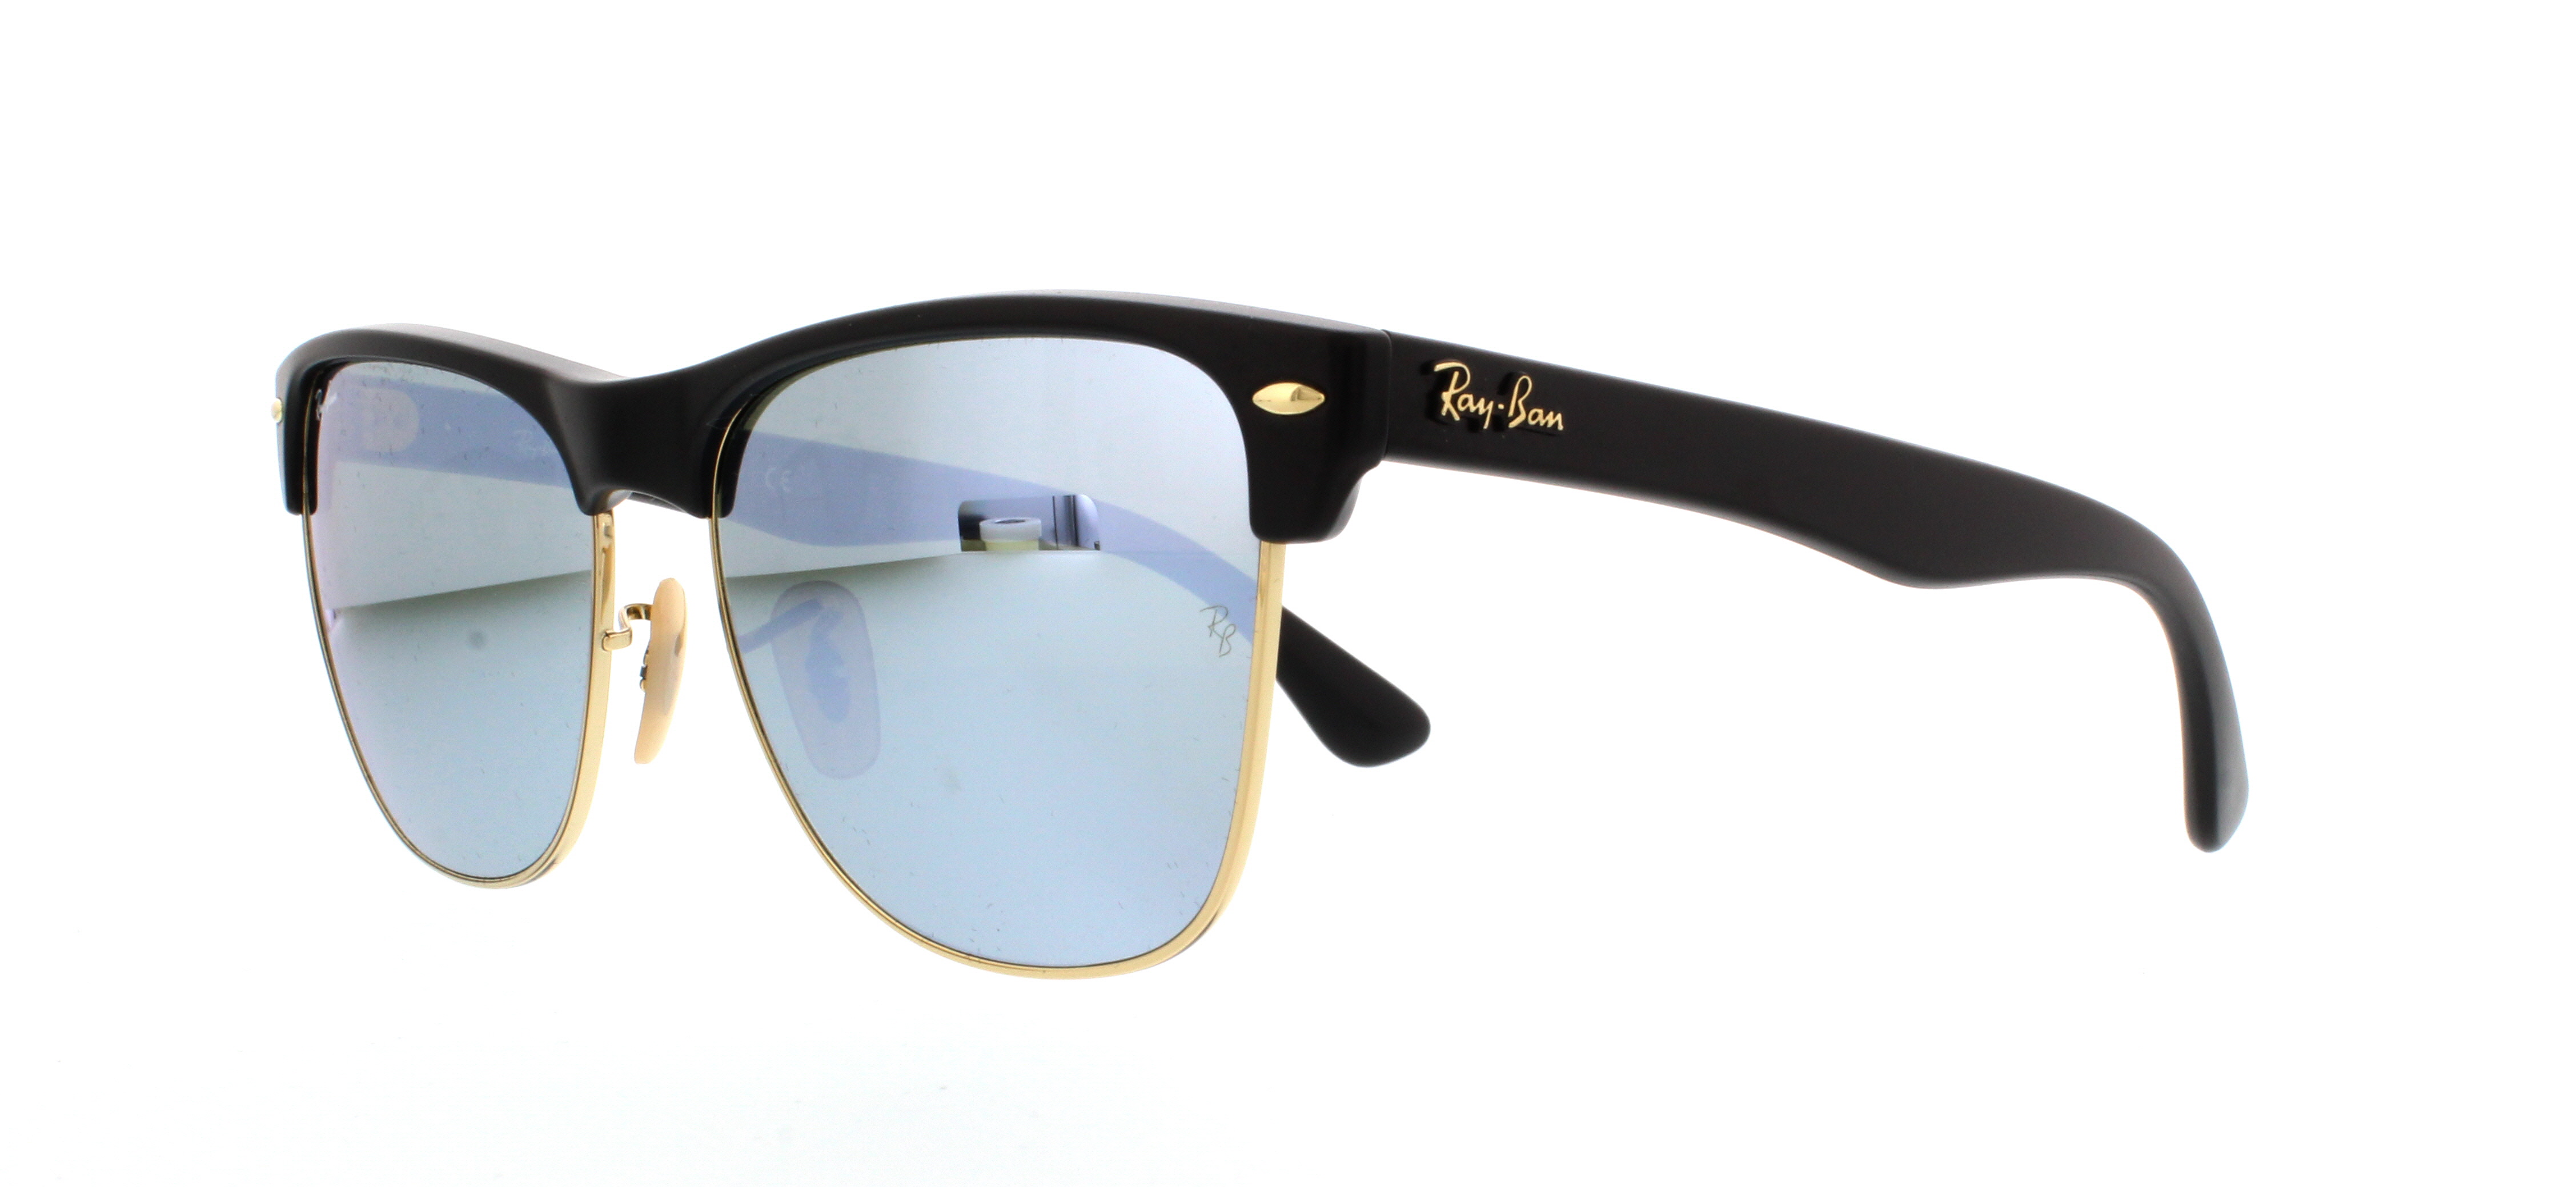 Designer Frames Outlet. Ray Ban Sunglasses RB4175 Clubmaster Oversized